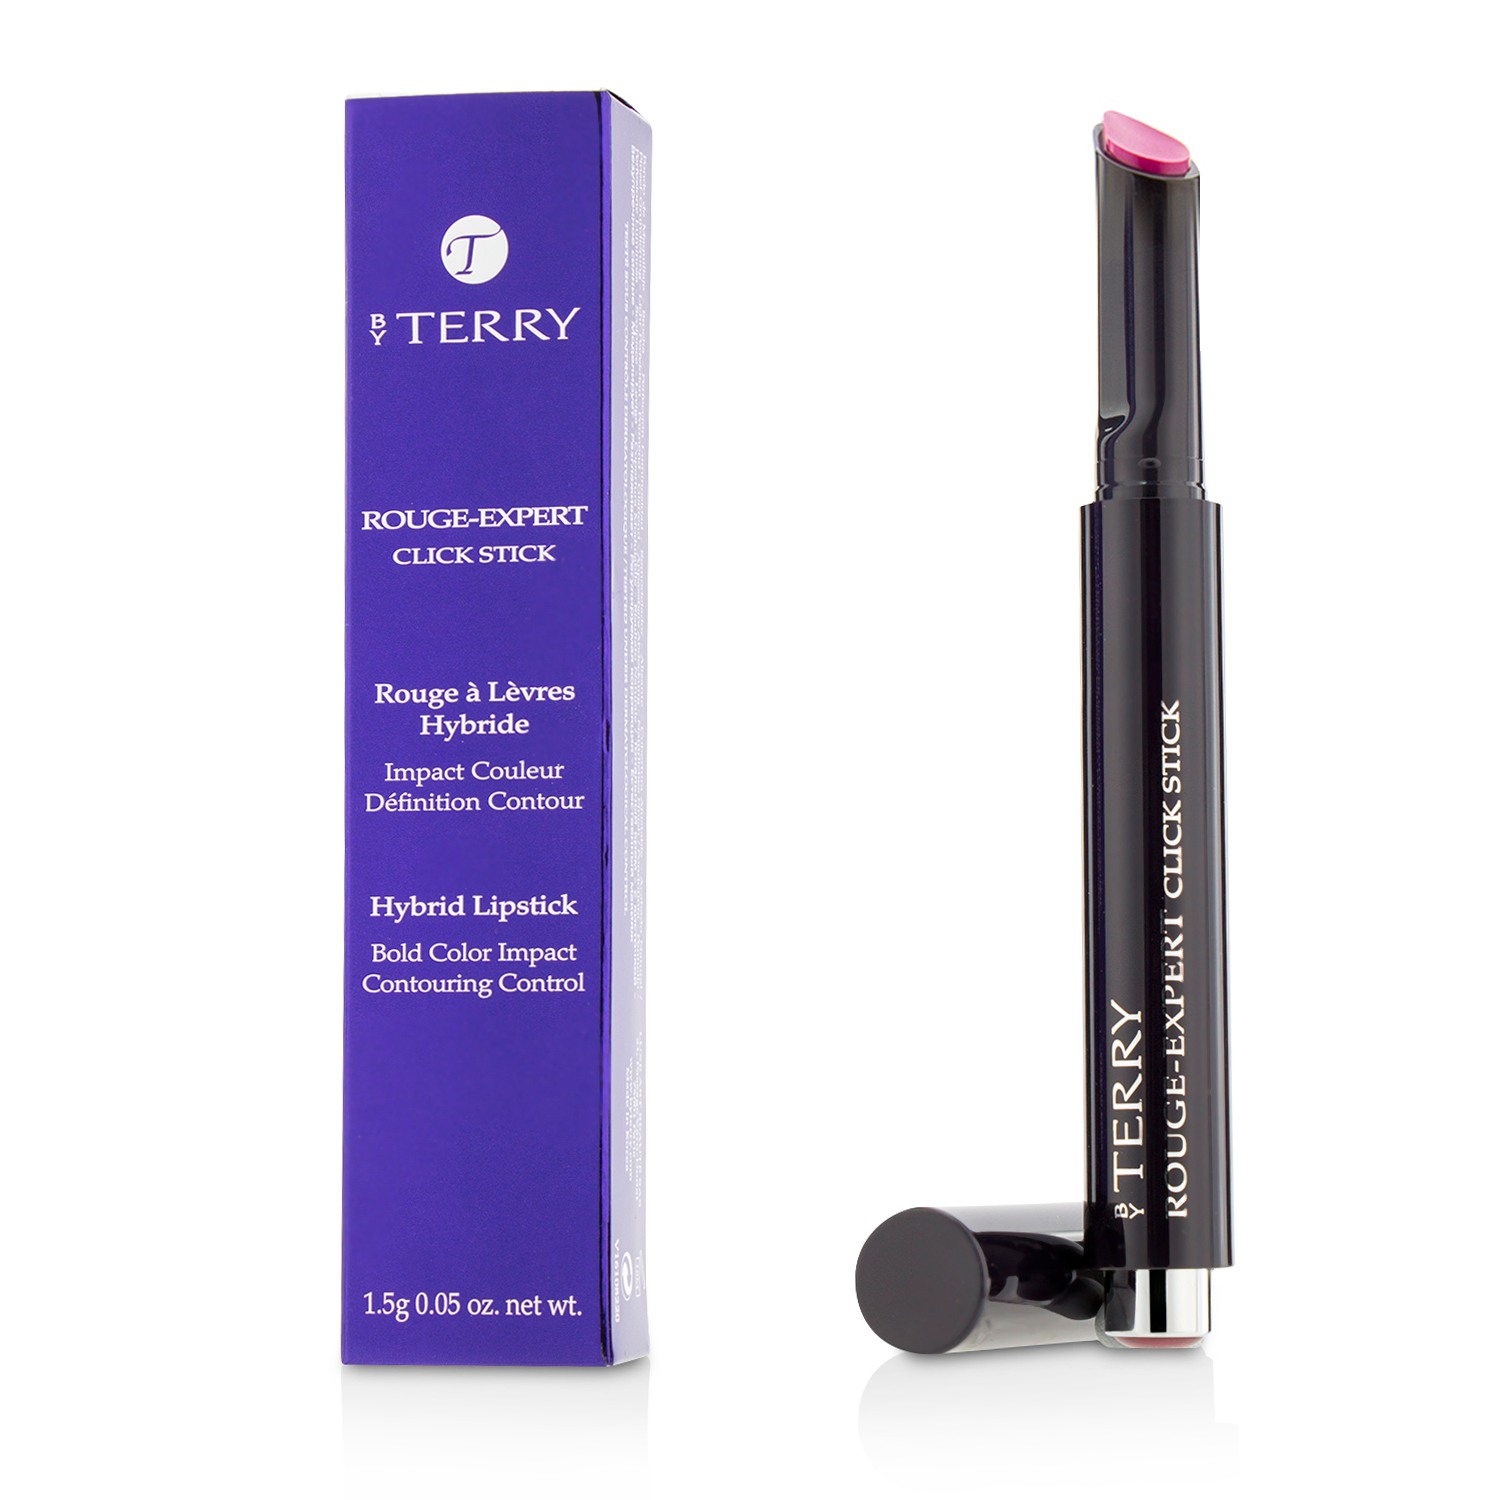 Rouge Expert Click Stick Hybrid Lipstick - # 23 Pink Pong By Terry Image